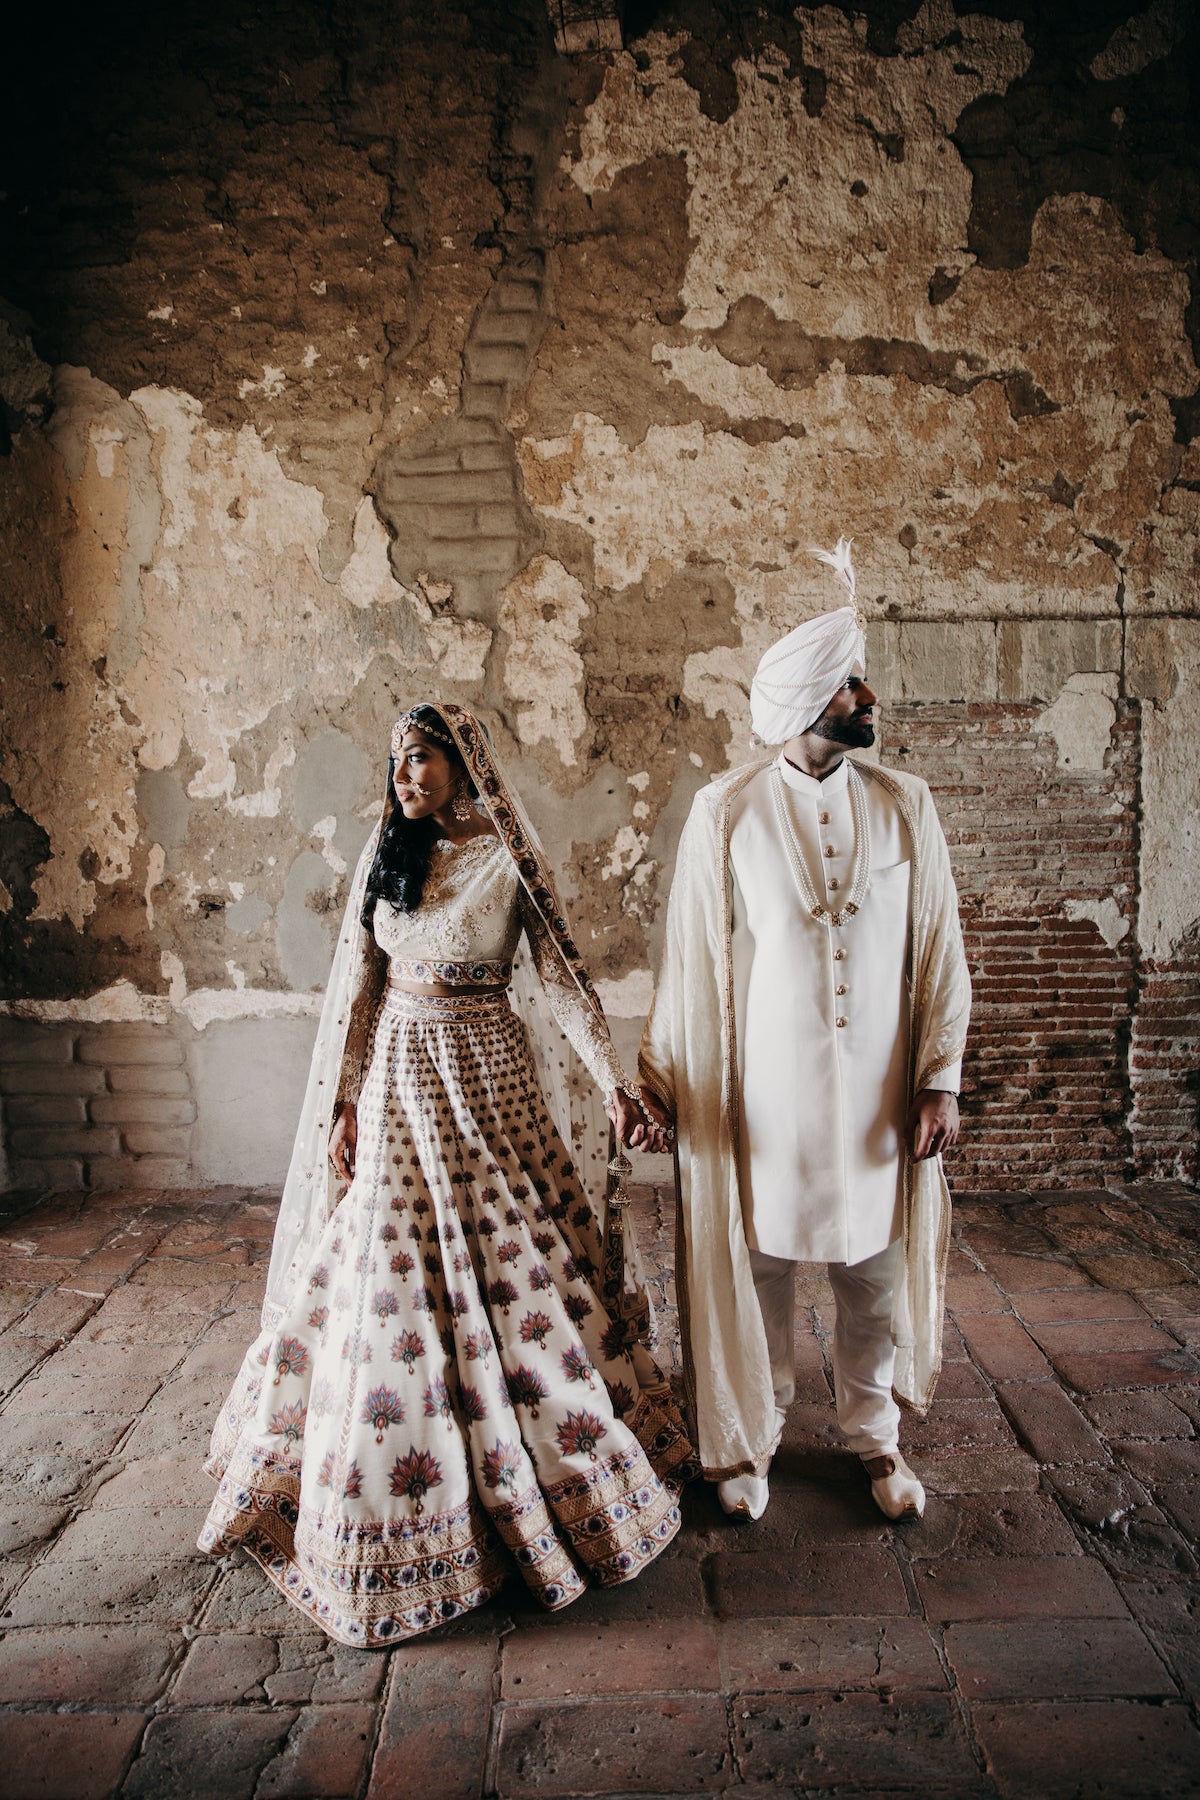 Couple in traditional cultural wedding attire standing in front of artsy brick wall